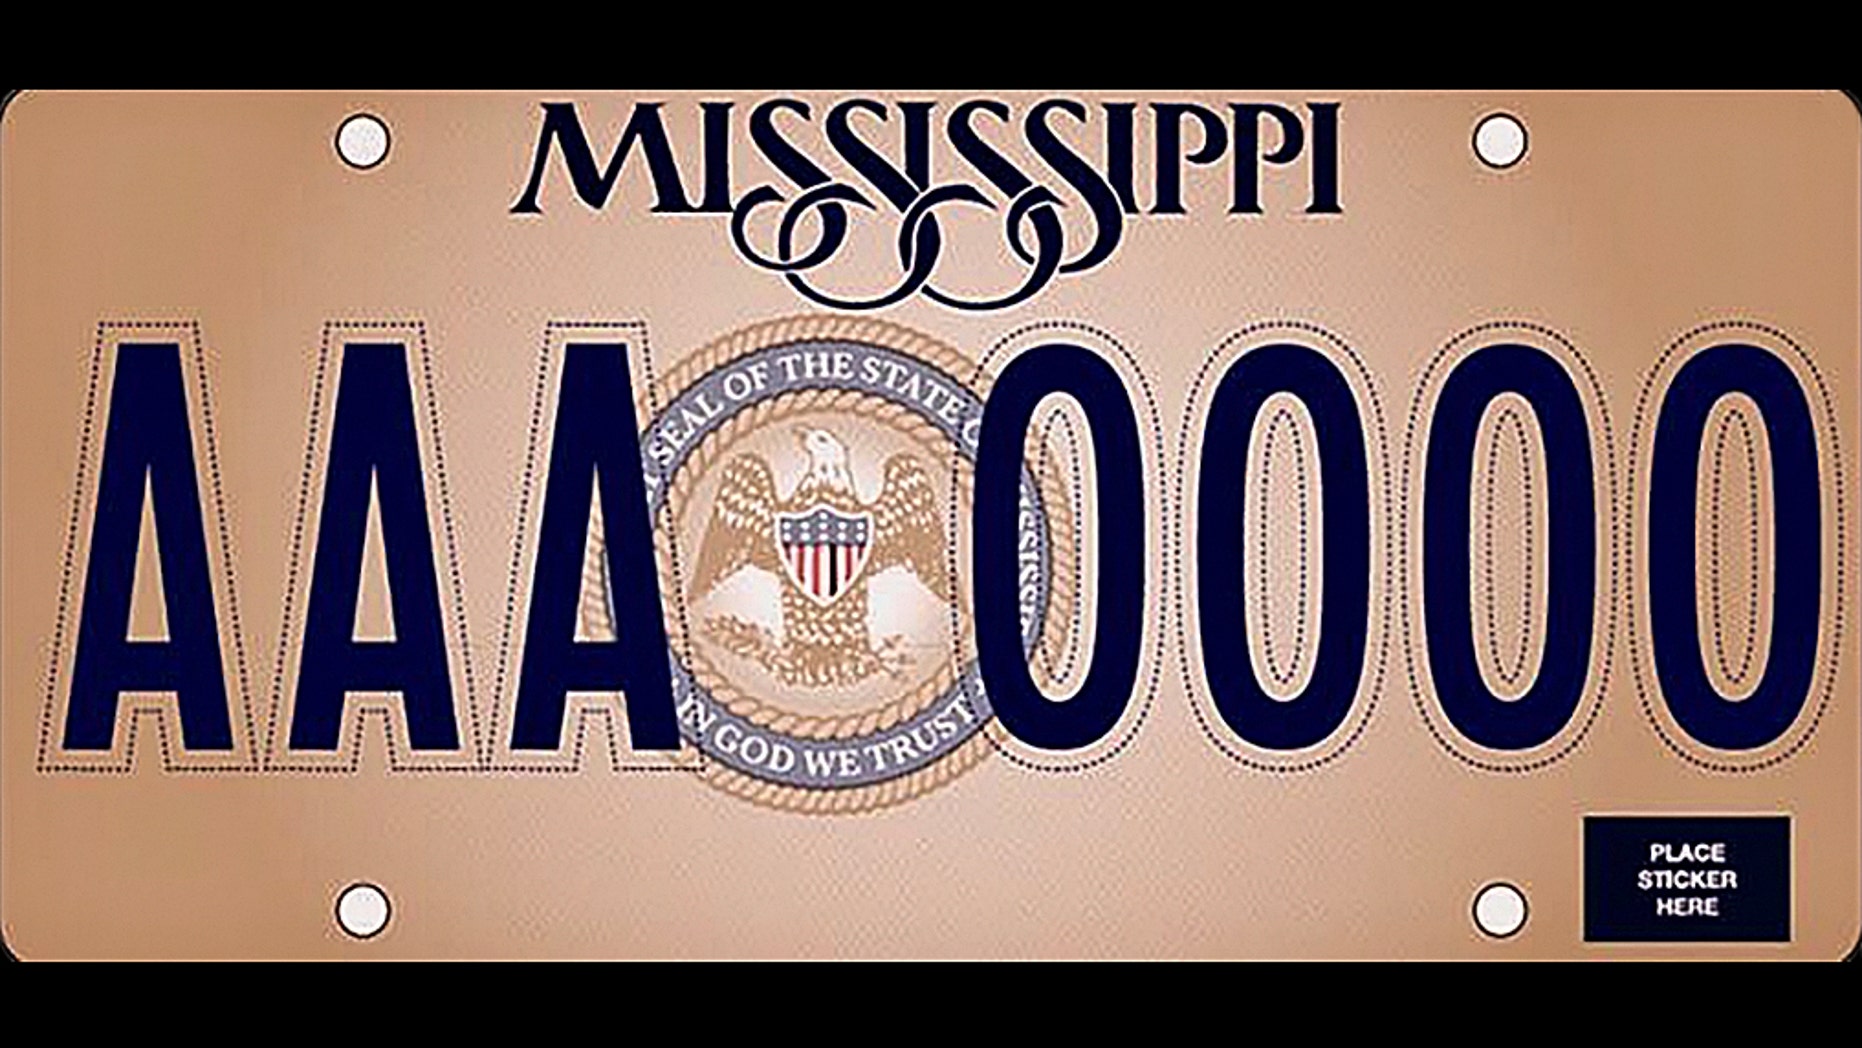 Mississippi unveils new state license plates with 